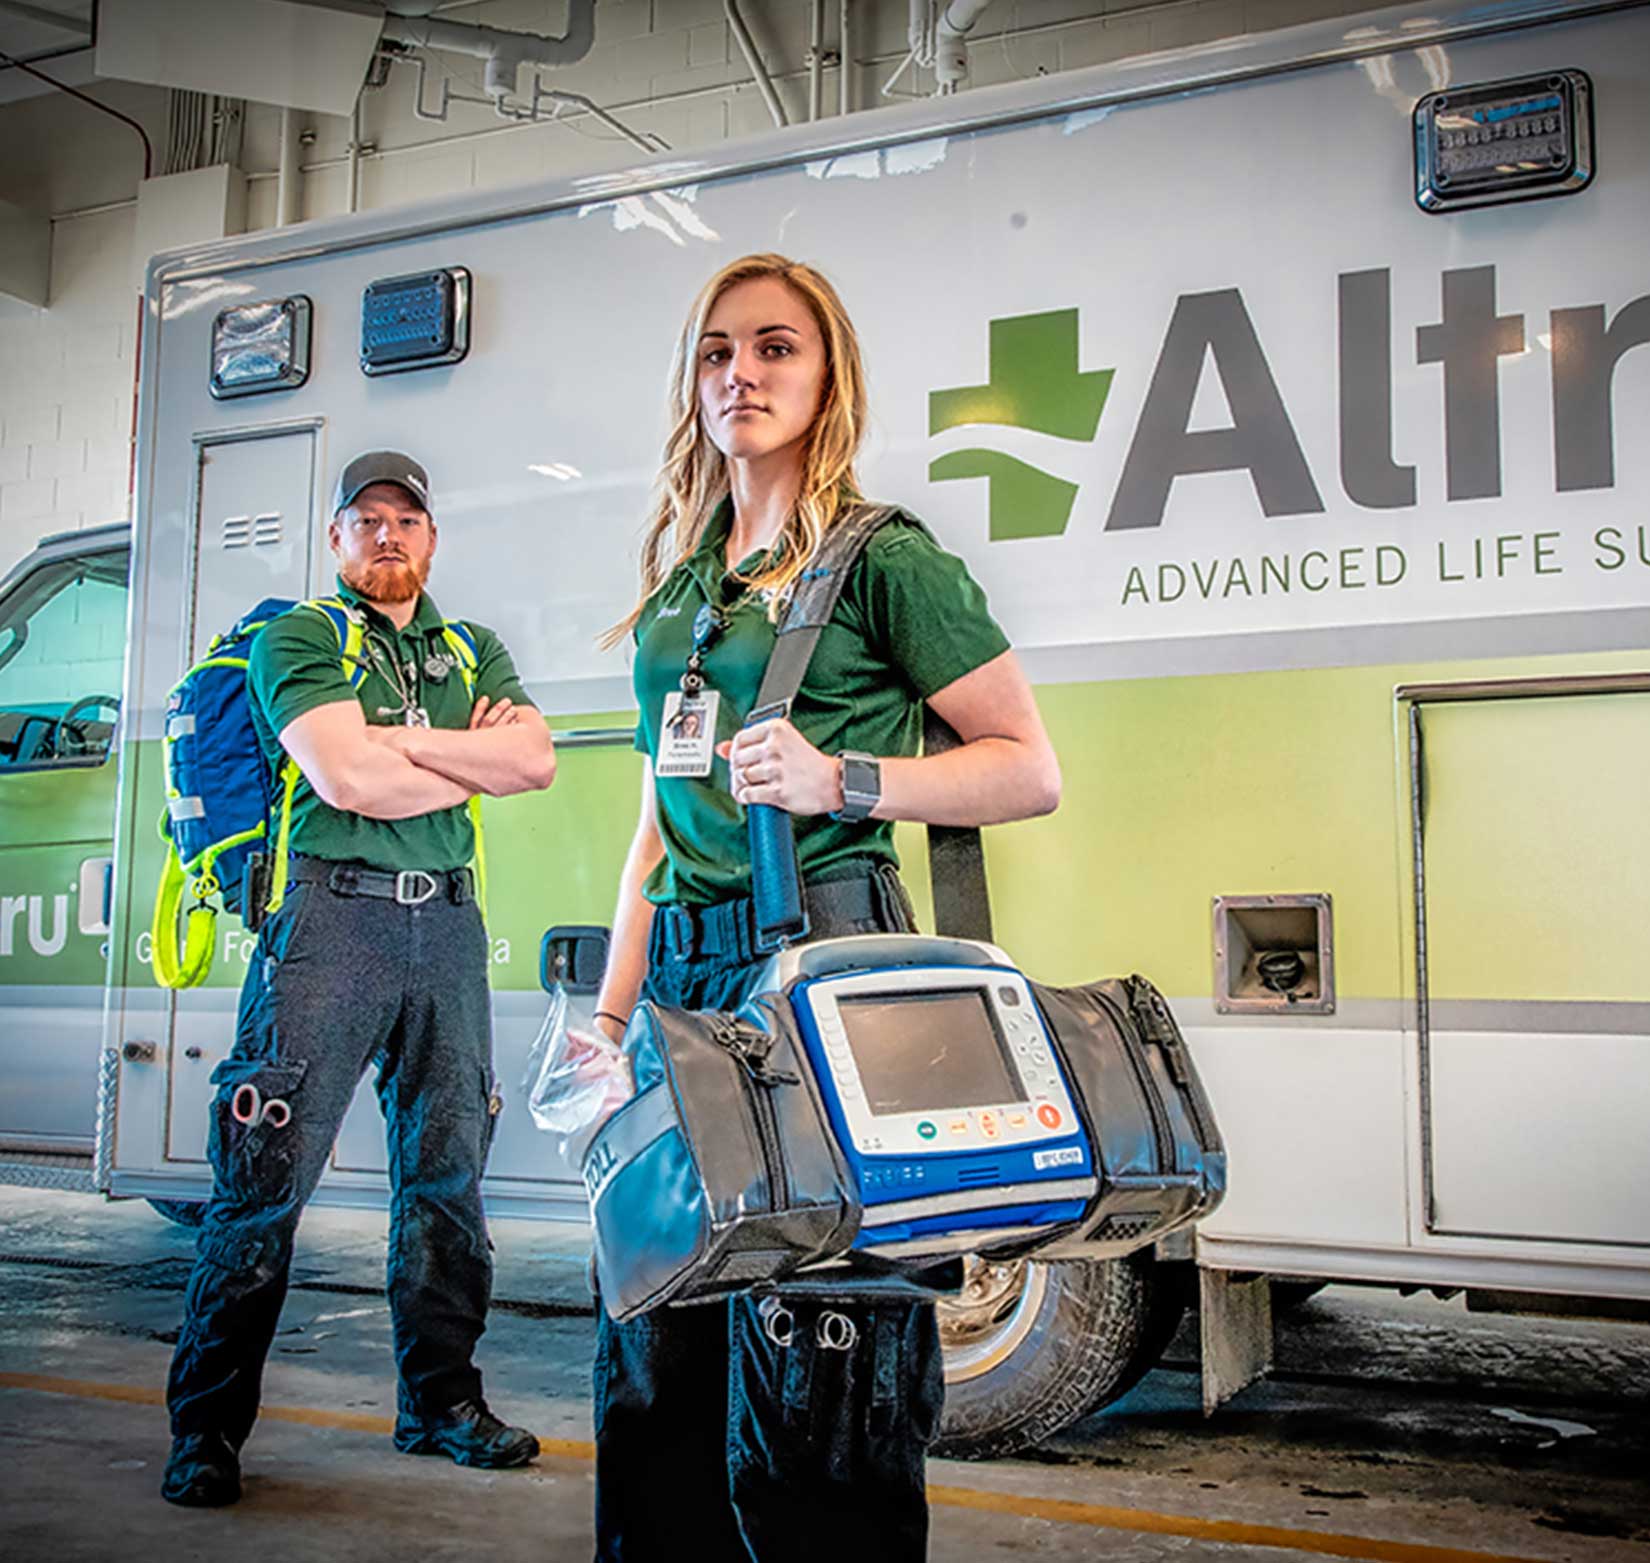 A professional photo of two Altru Hospital emergency medical technicians standing in front of an ambulance